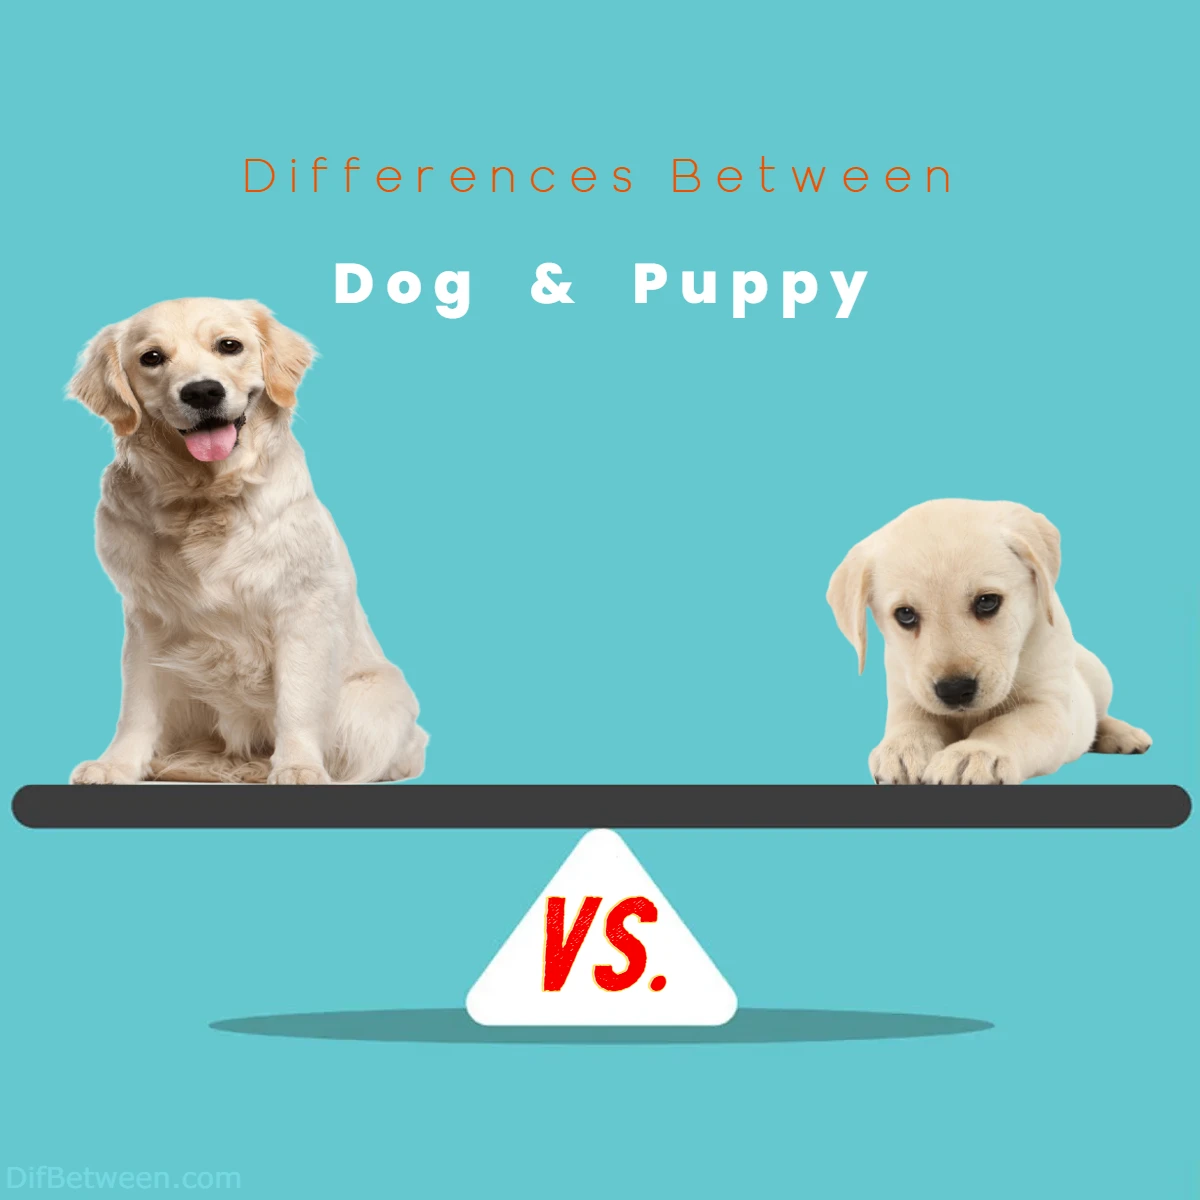 Differences Between Dog vs Puppy